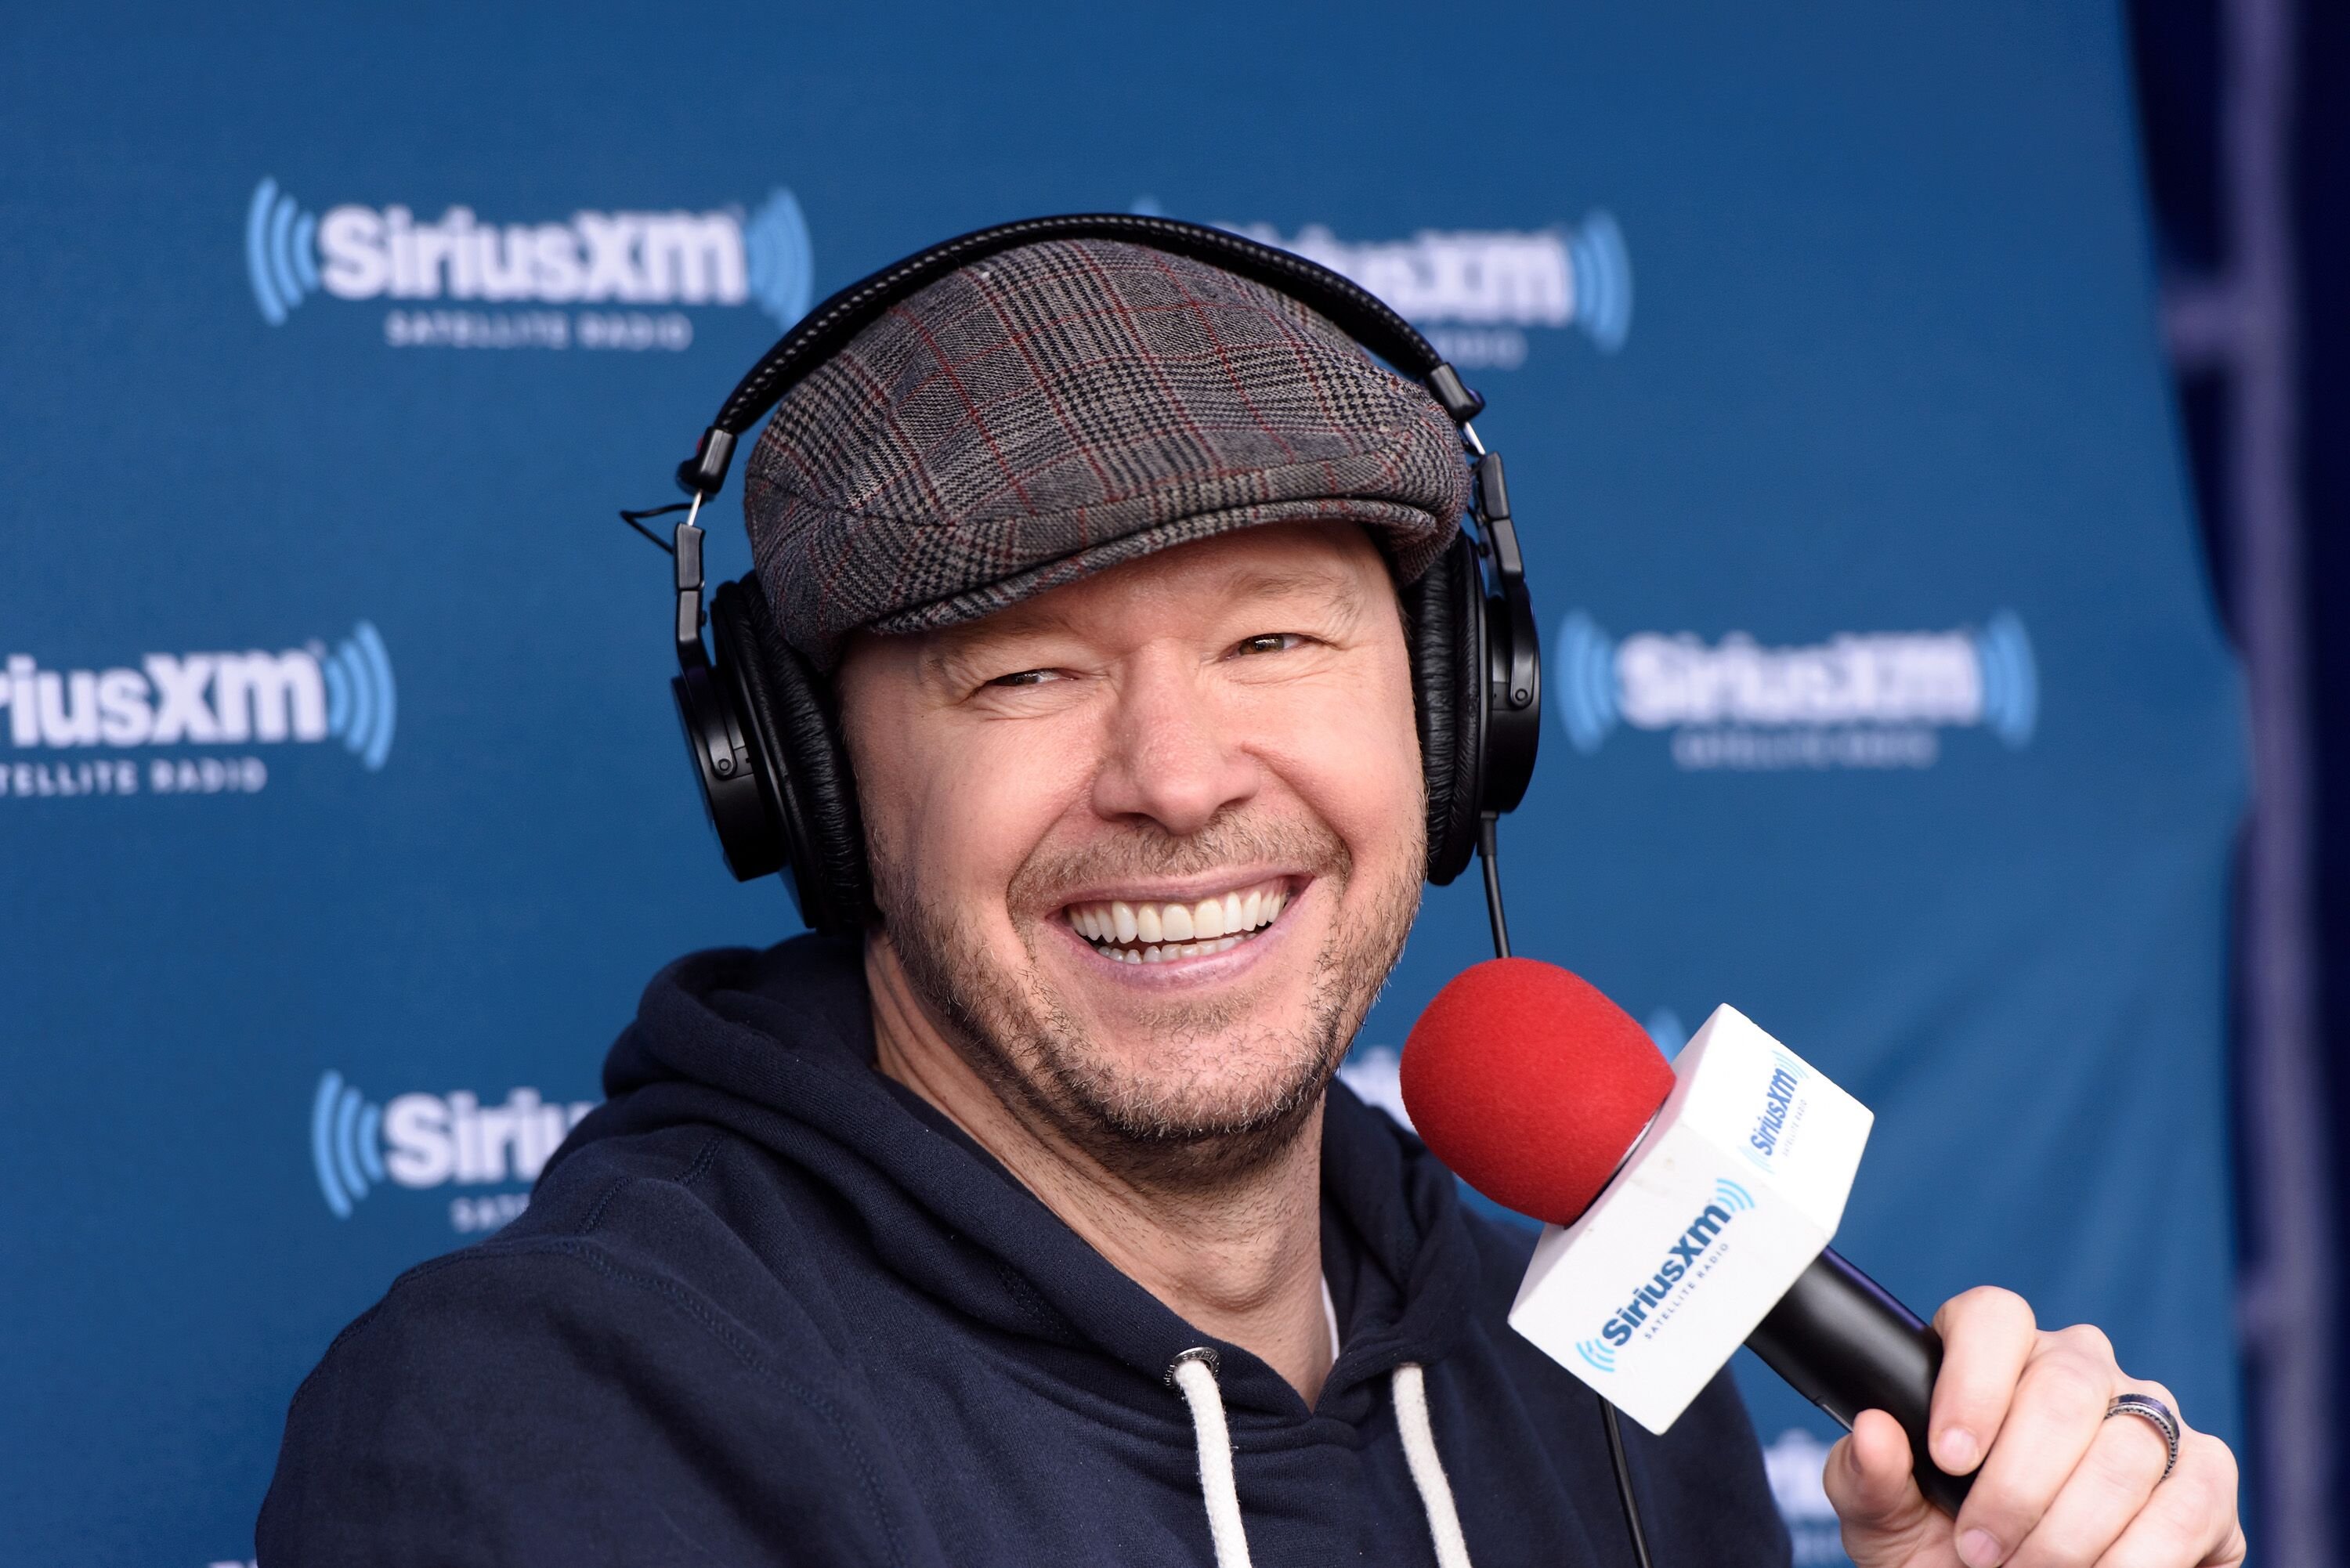 Donnie Wahlberg attends Jenny McCarthy's SiriusXM show from Grant Park in Chicago, IL before the NFL Draft, in Chicago, Illinois. | Photo: Getty Images